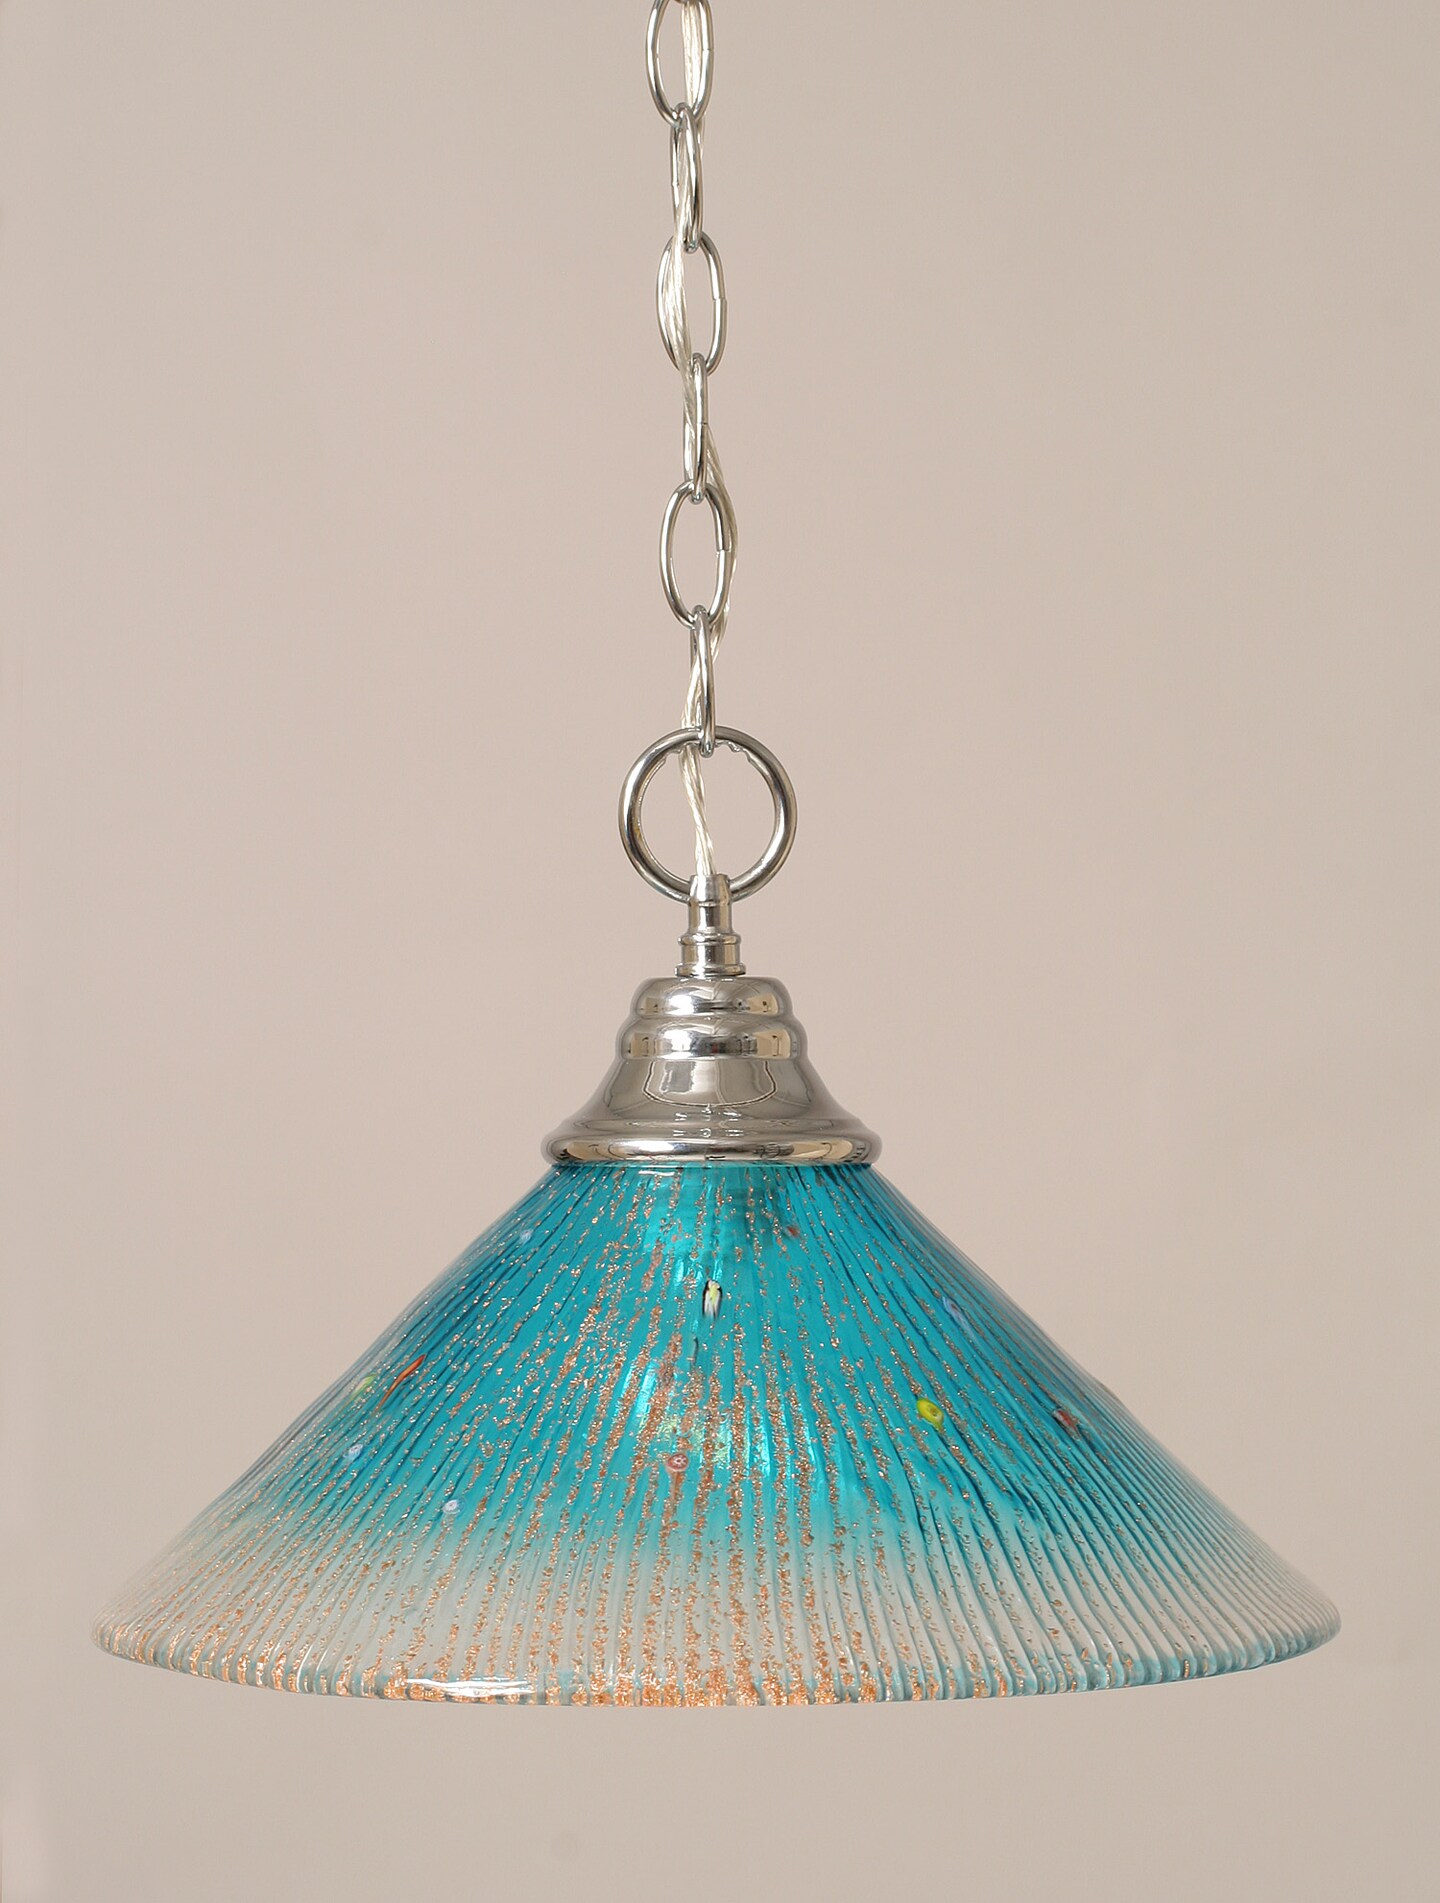 Chain Hung Pendant Shown In Chrome Finish With 12 Teal Crystal Glass